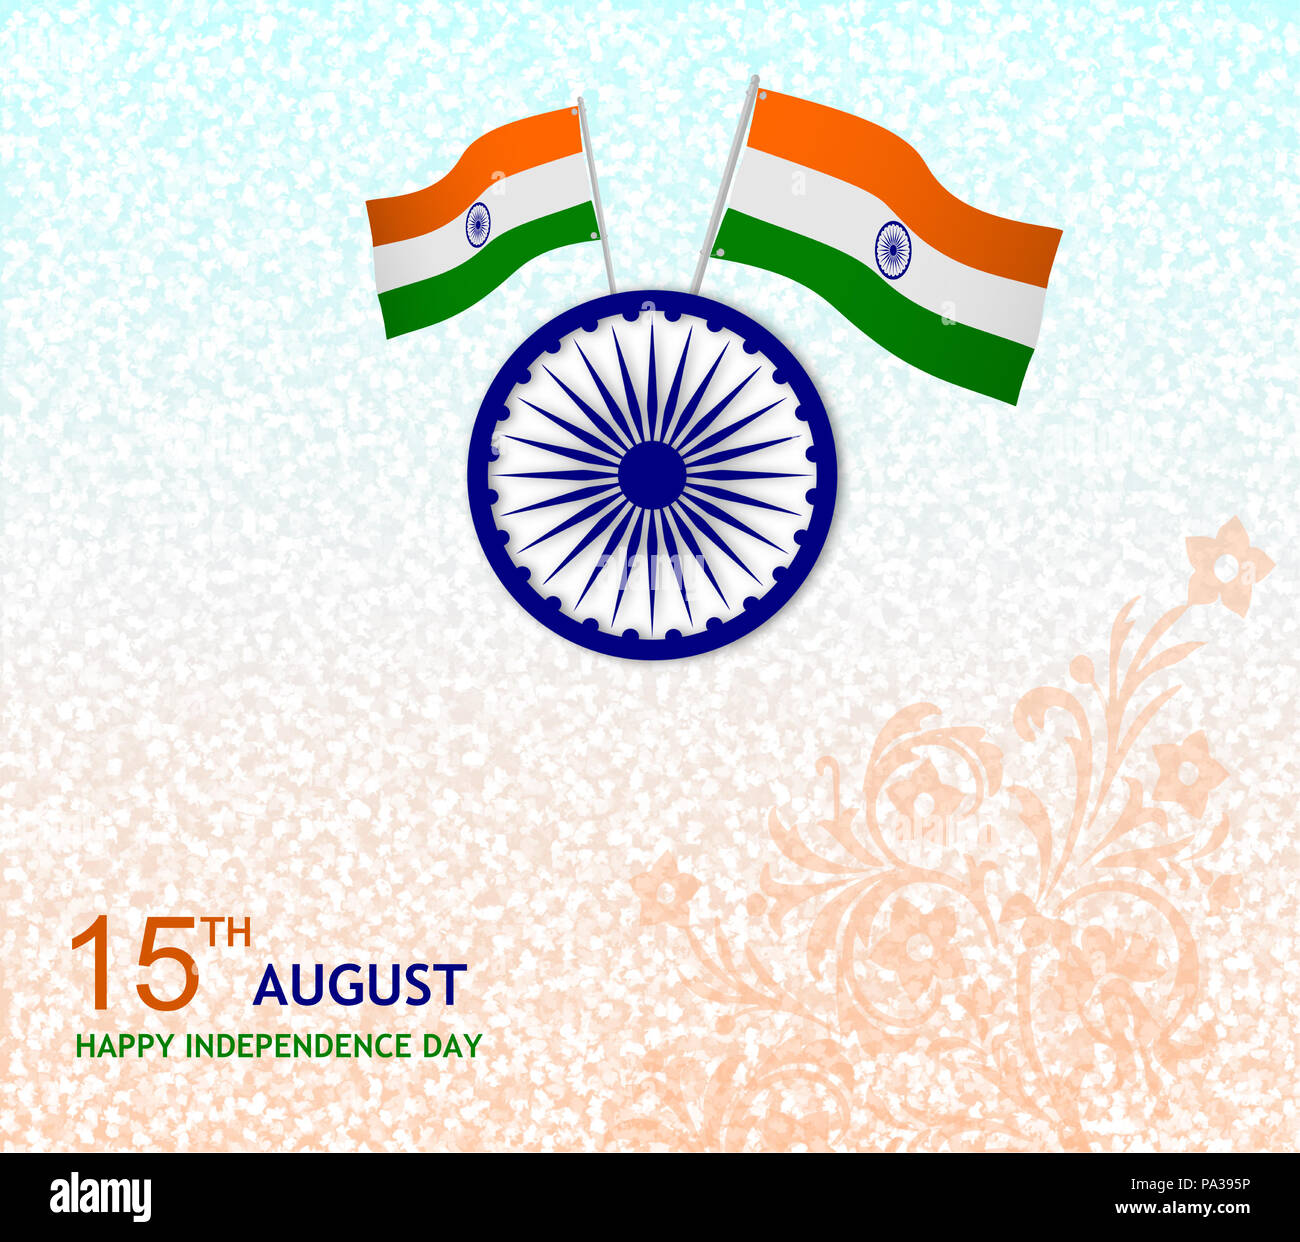 Happy independence day india postcard Stock Photo